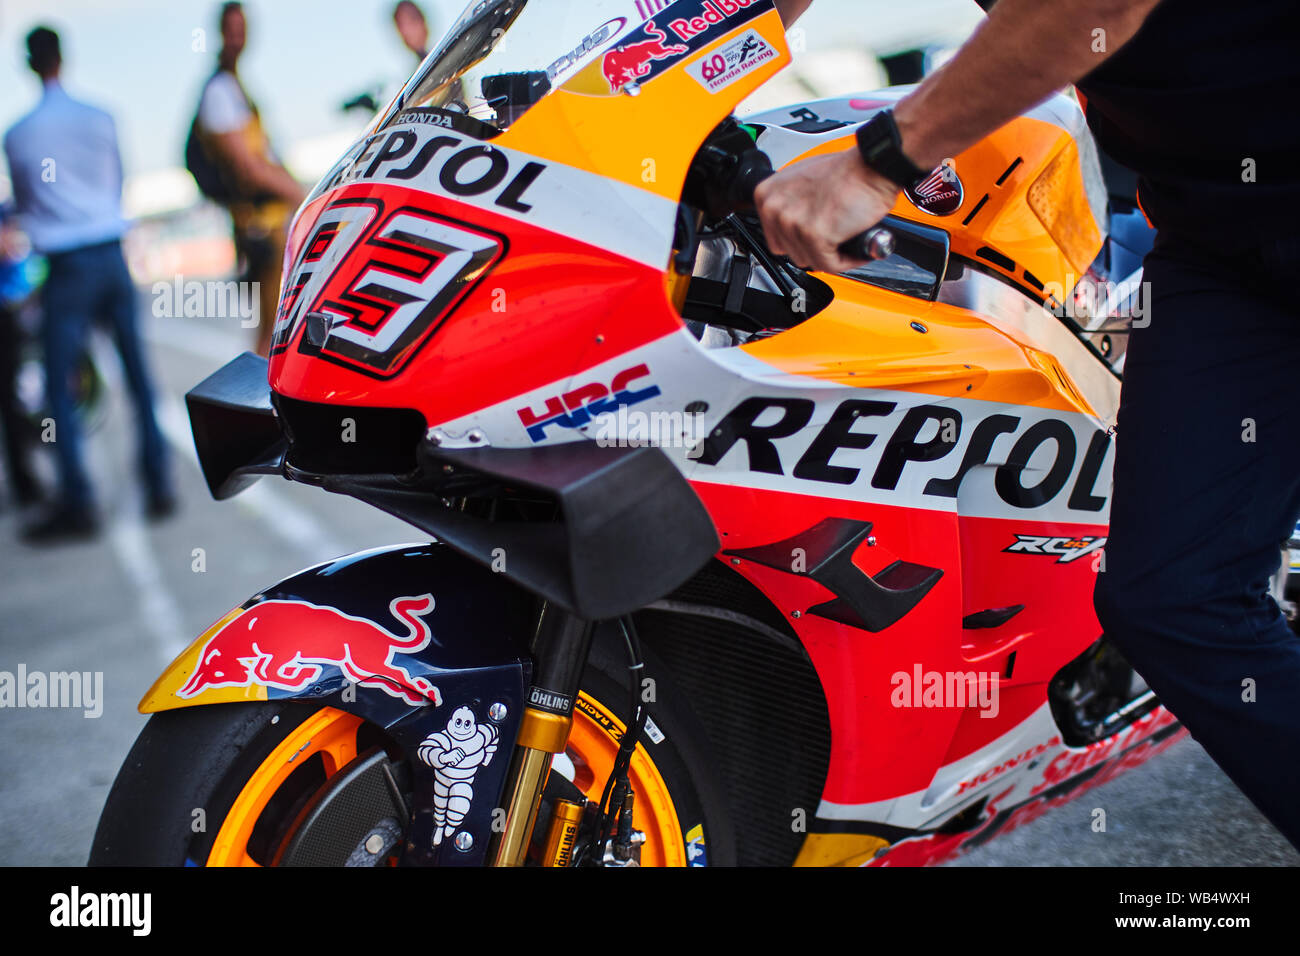 Towcester, Northamptonshire, UK. 24th Aug, 2019. Marc Marquez (SPA) and  Repsol Honda Team during the 2019